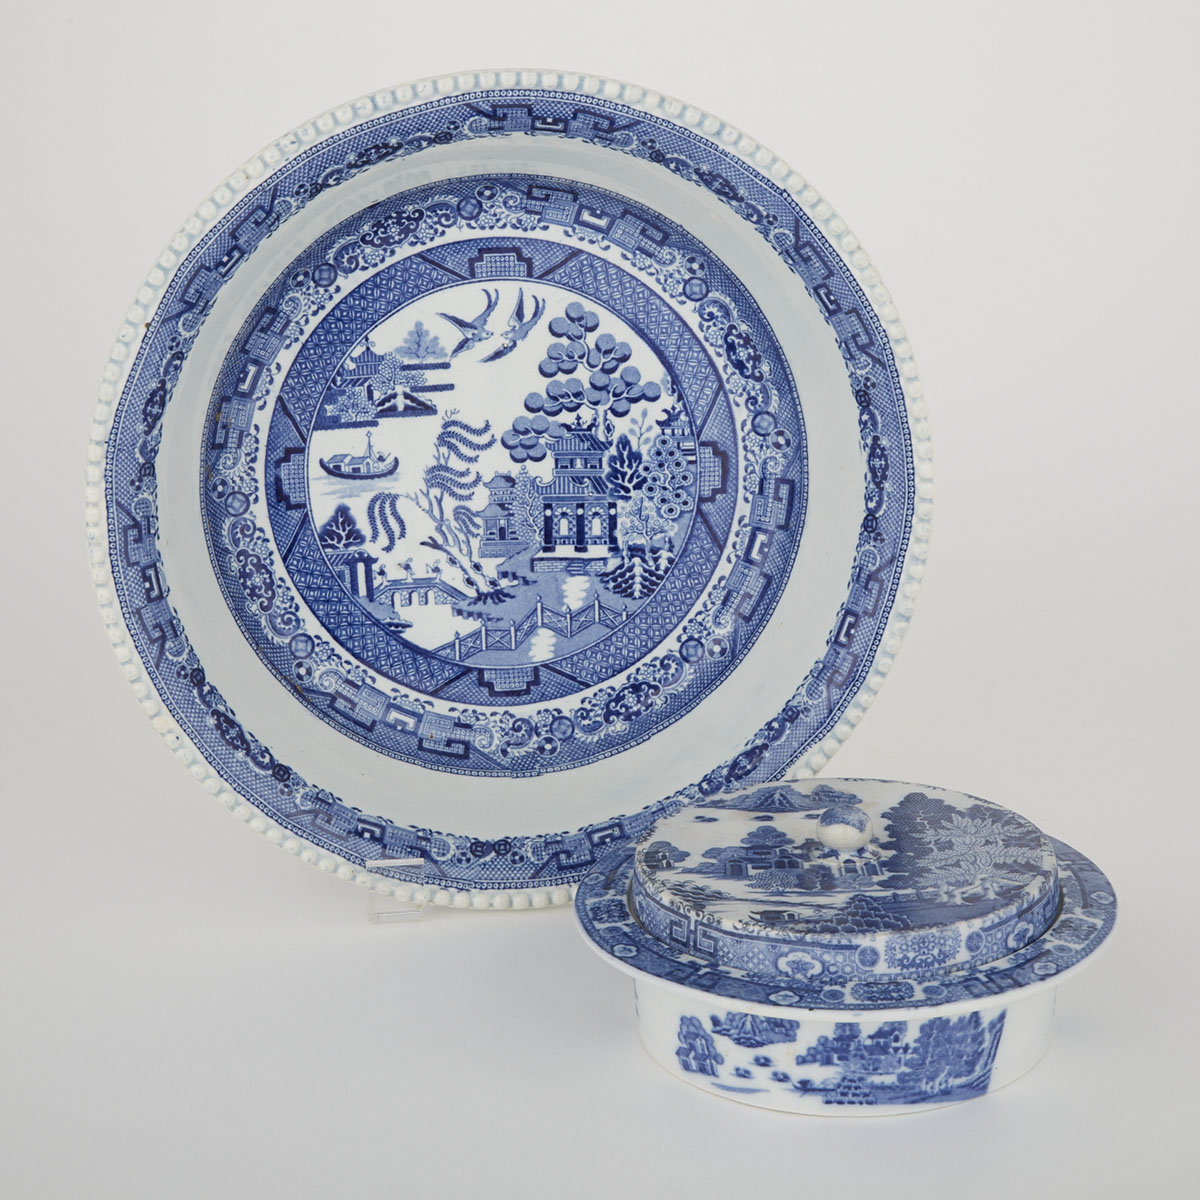 English Blue-Printed Pearlware Basin and Covered Dish, c.1800